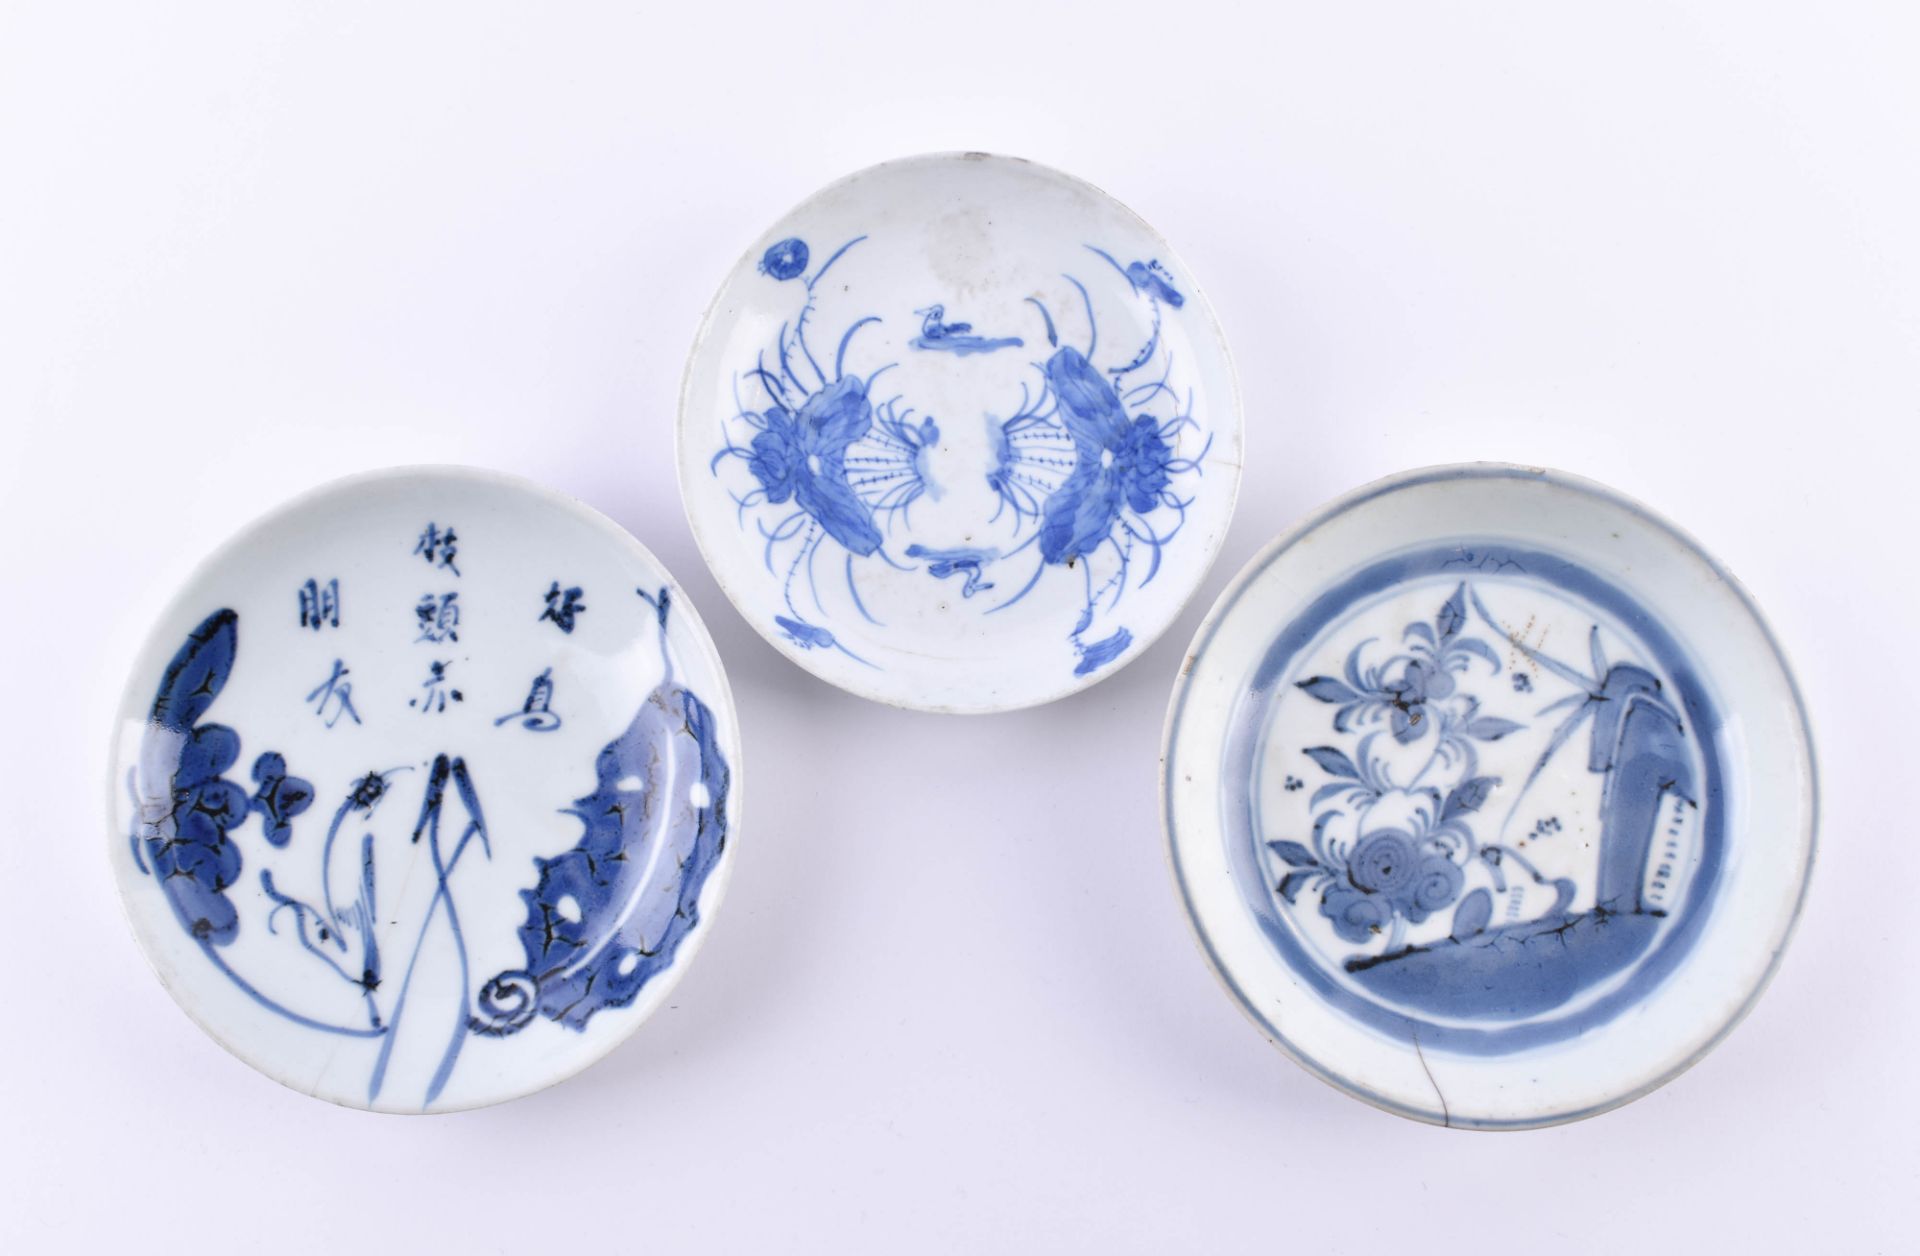  A group of Asian porcelain China Qing dynasty - Image 2 of 10